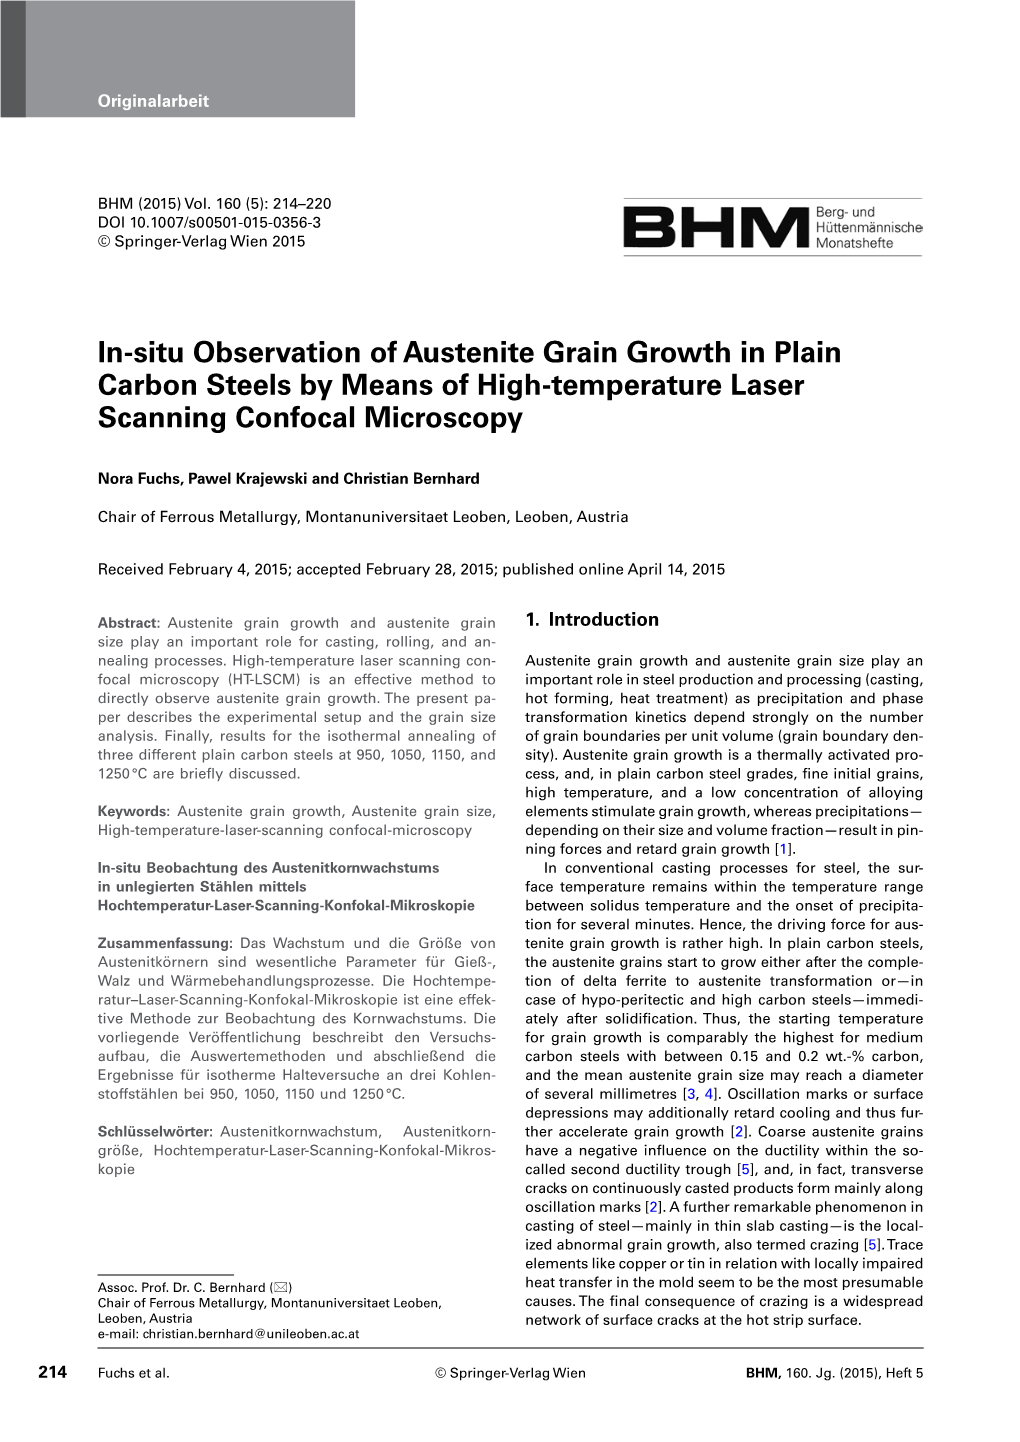 In-Situ Observation of Austenite Grain Growth in Plain Carbon Steels by Means of High-Temperature Laser Scanning Confocal Microscopy